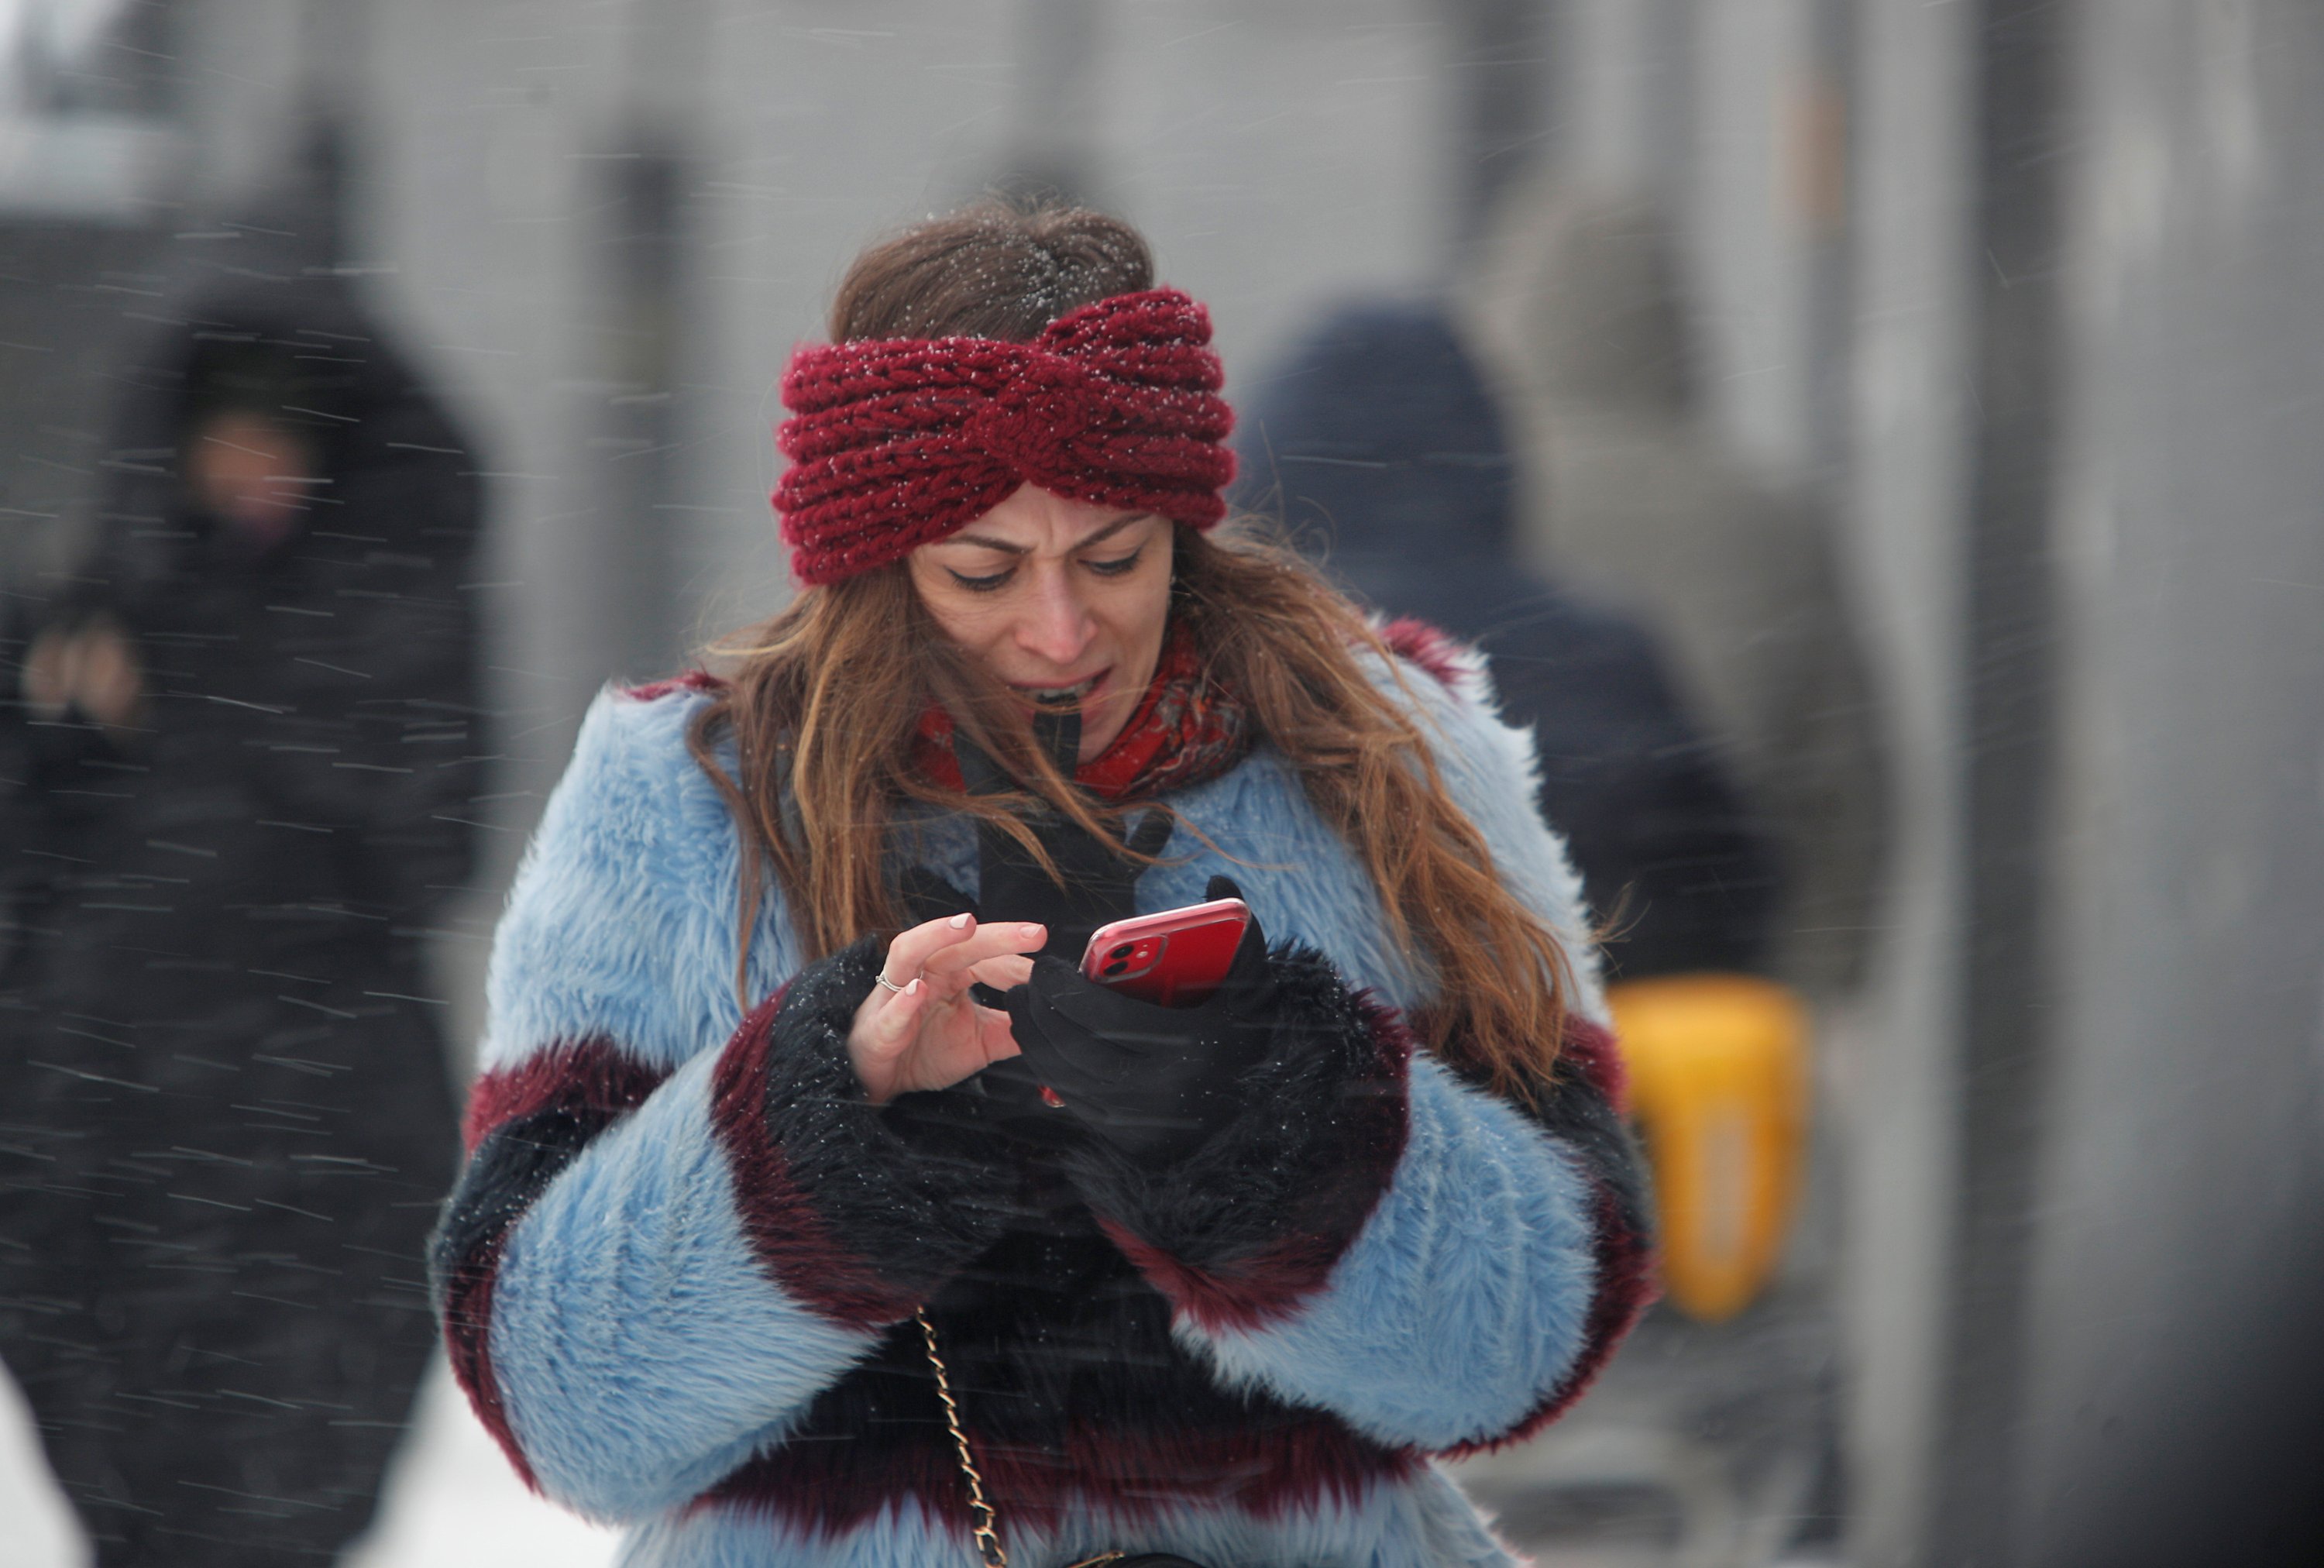 A woman uses a smartphone as she walks along a street during heavy snowfall in Moscow, Russia on Feb. 12, 2021. (Reuters Photo)